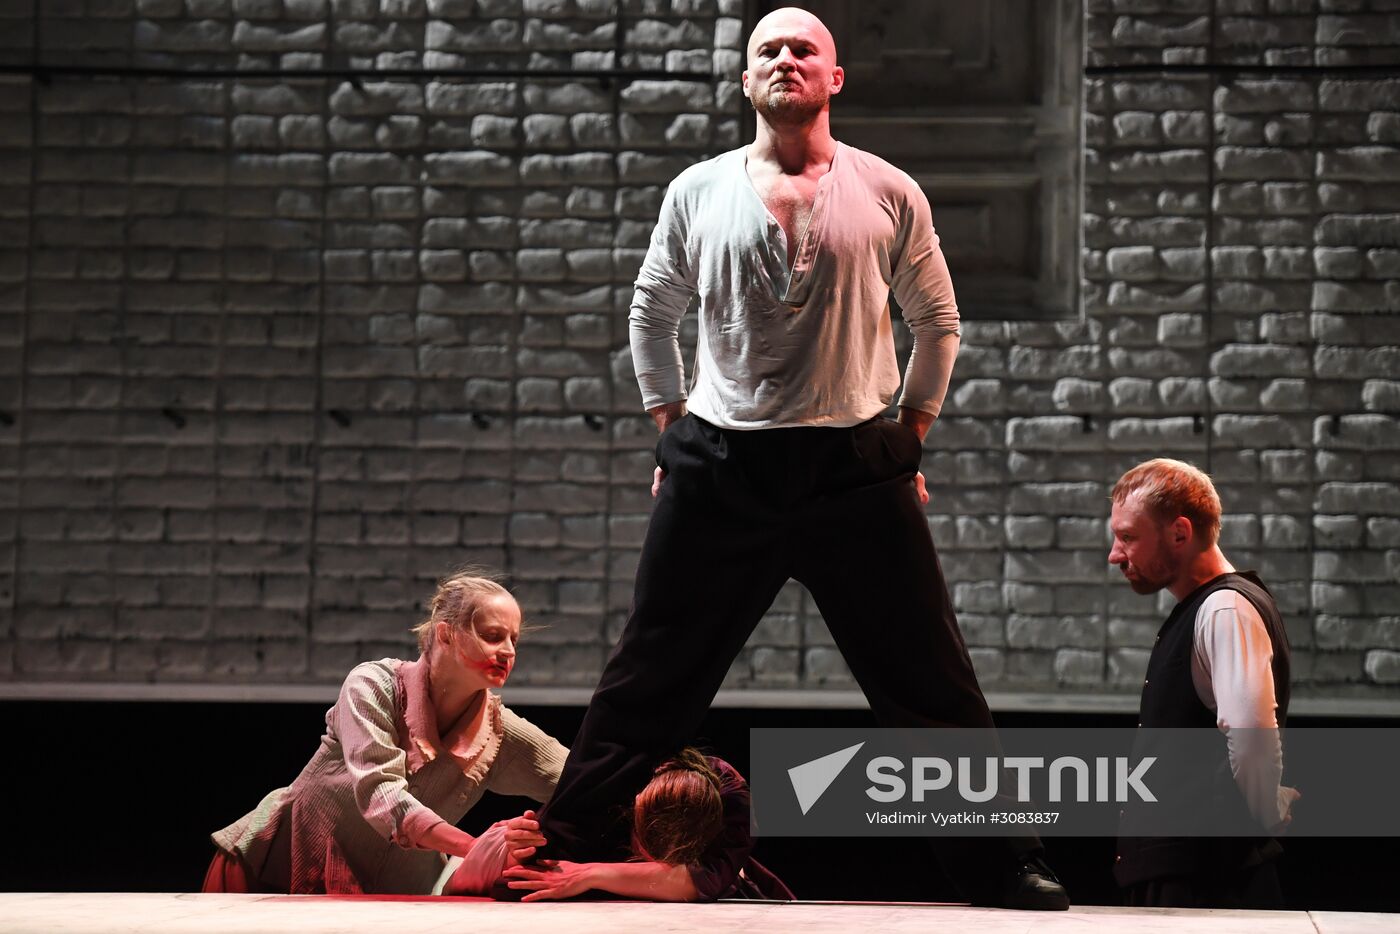 Play "Katerina Ilvovna" staged at Tabakov Theater